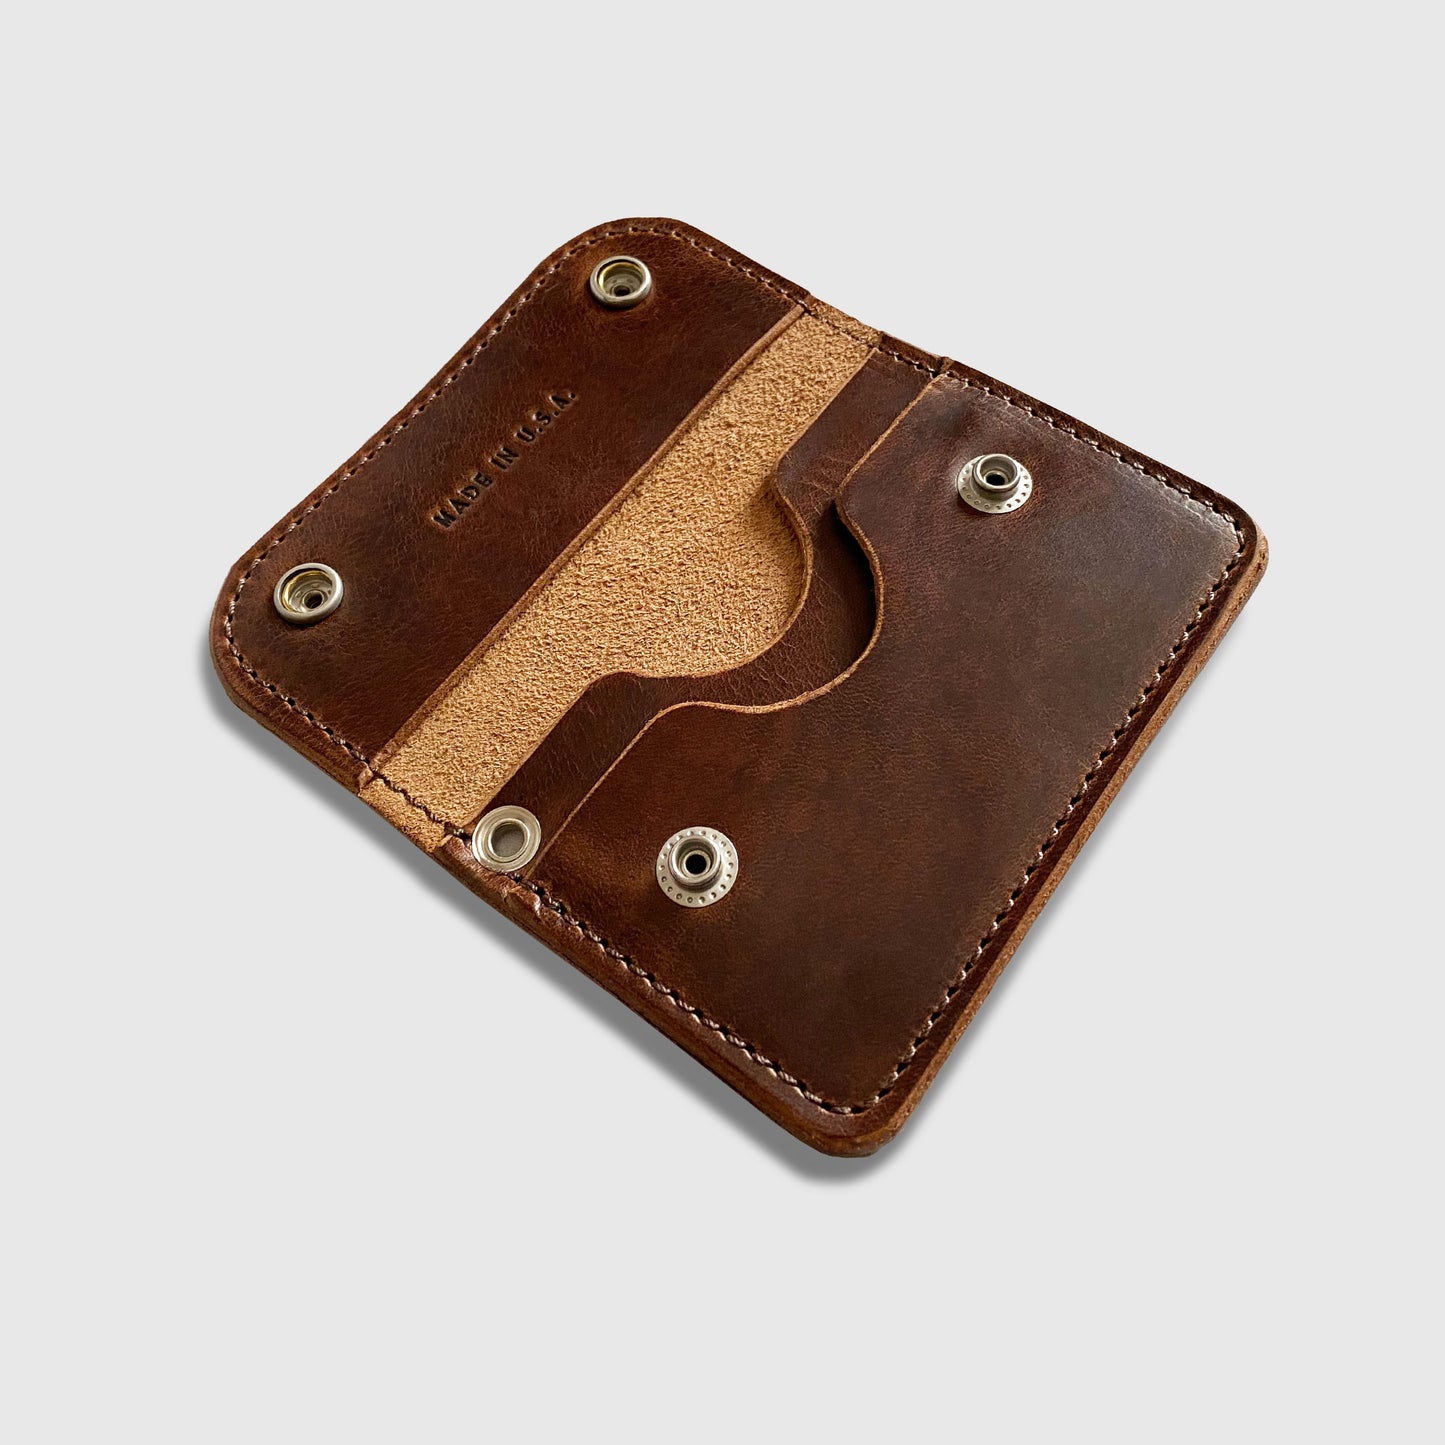 THE 50CC WALLET - Brown